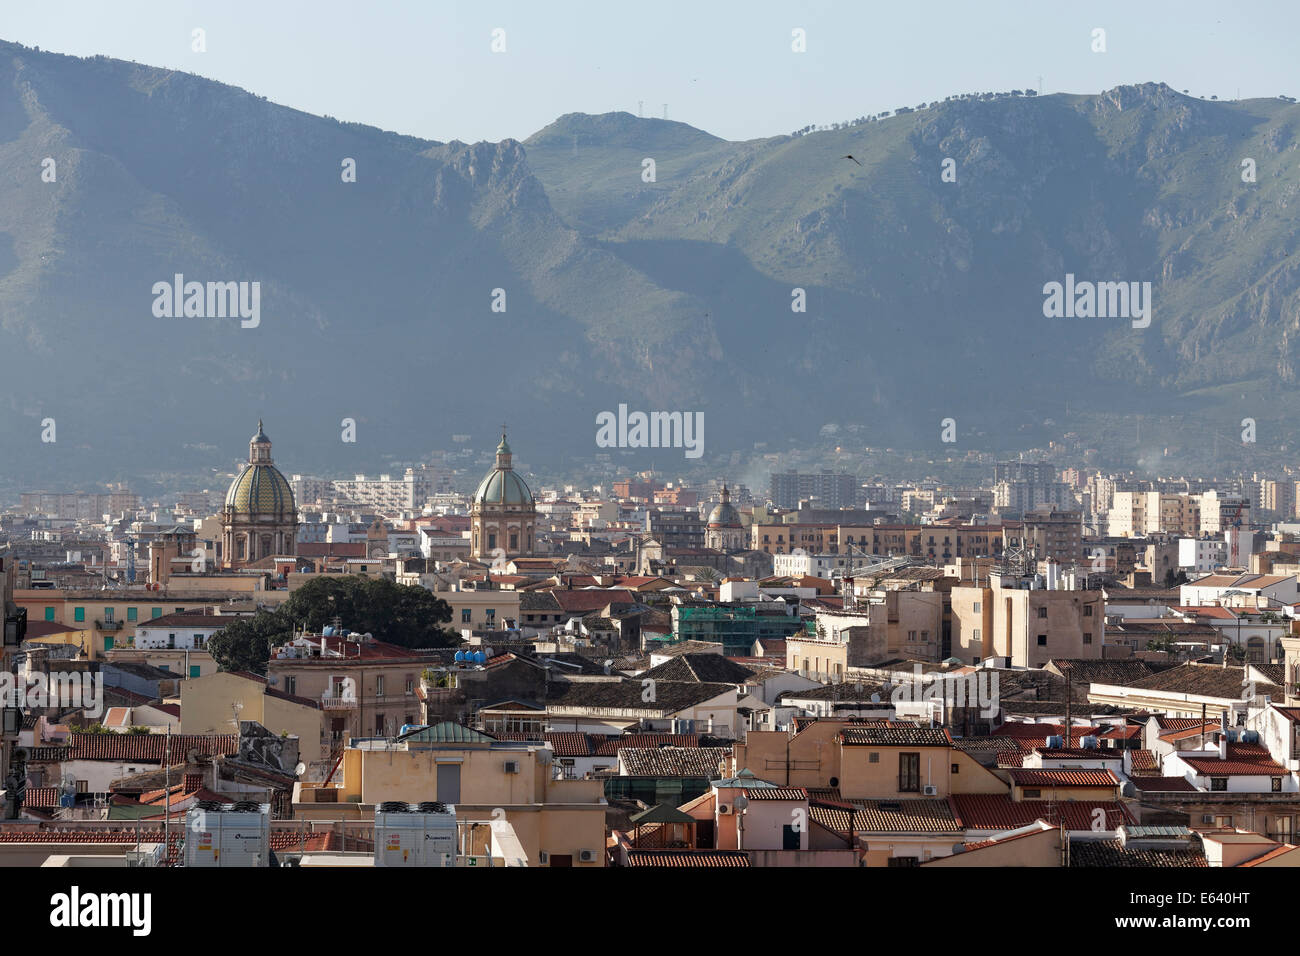 Historic centre with mountains, Palermo, Sicily, Italy Stock Photo